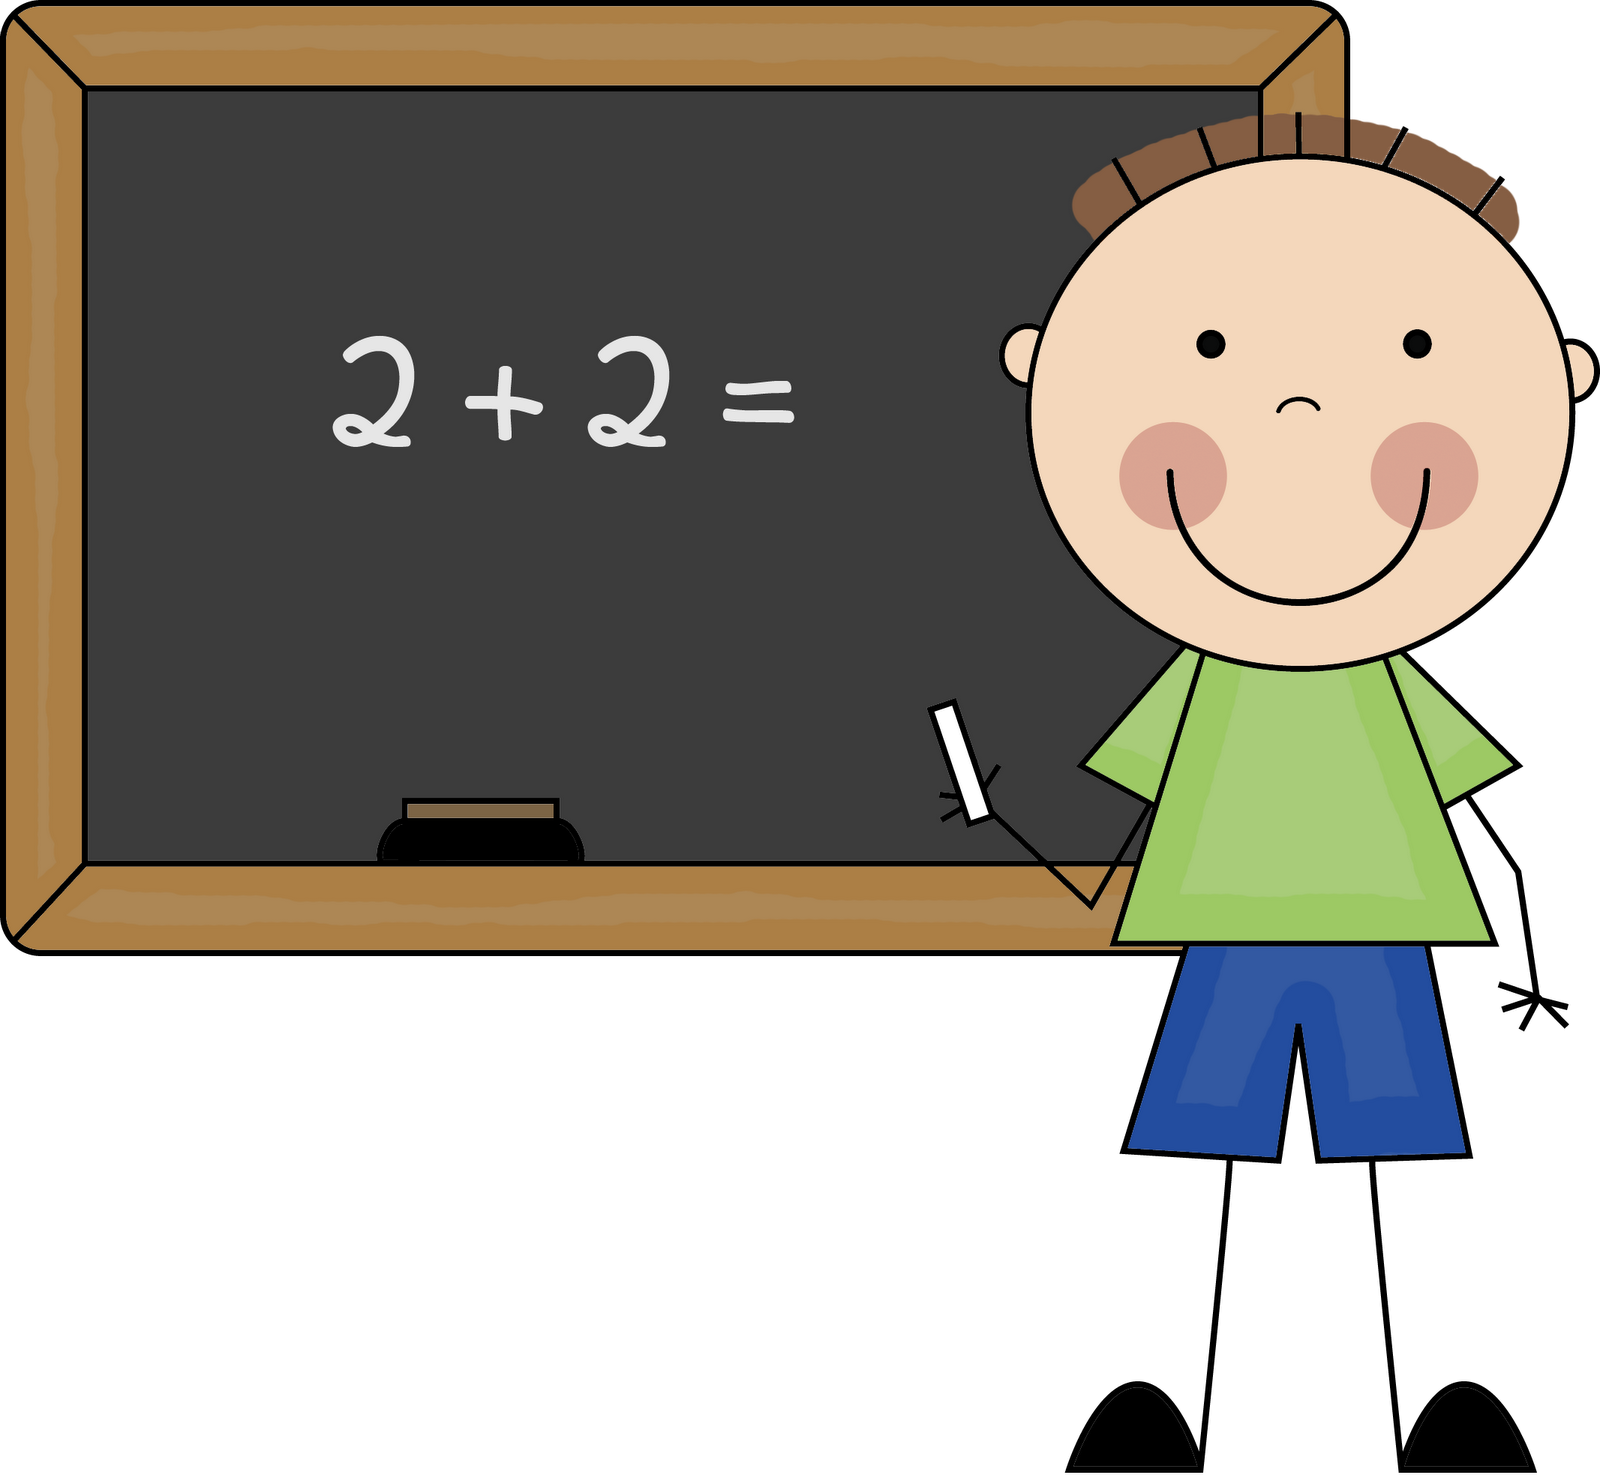 Sci science. Intelligent clipart math learning